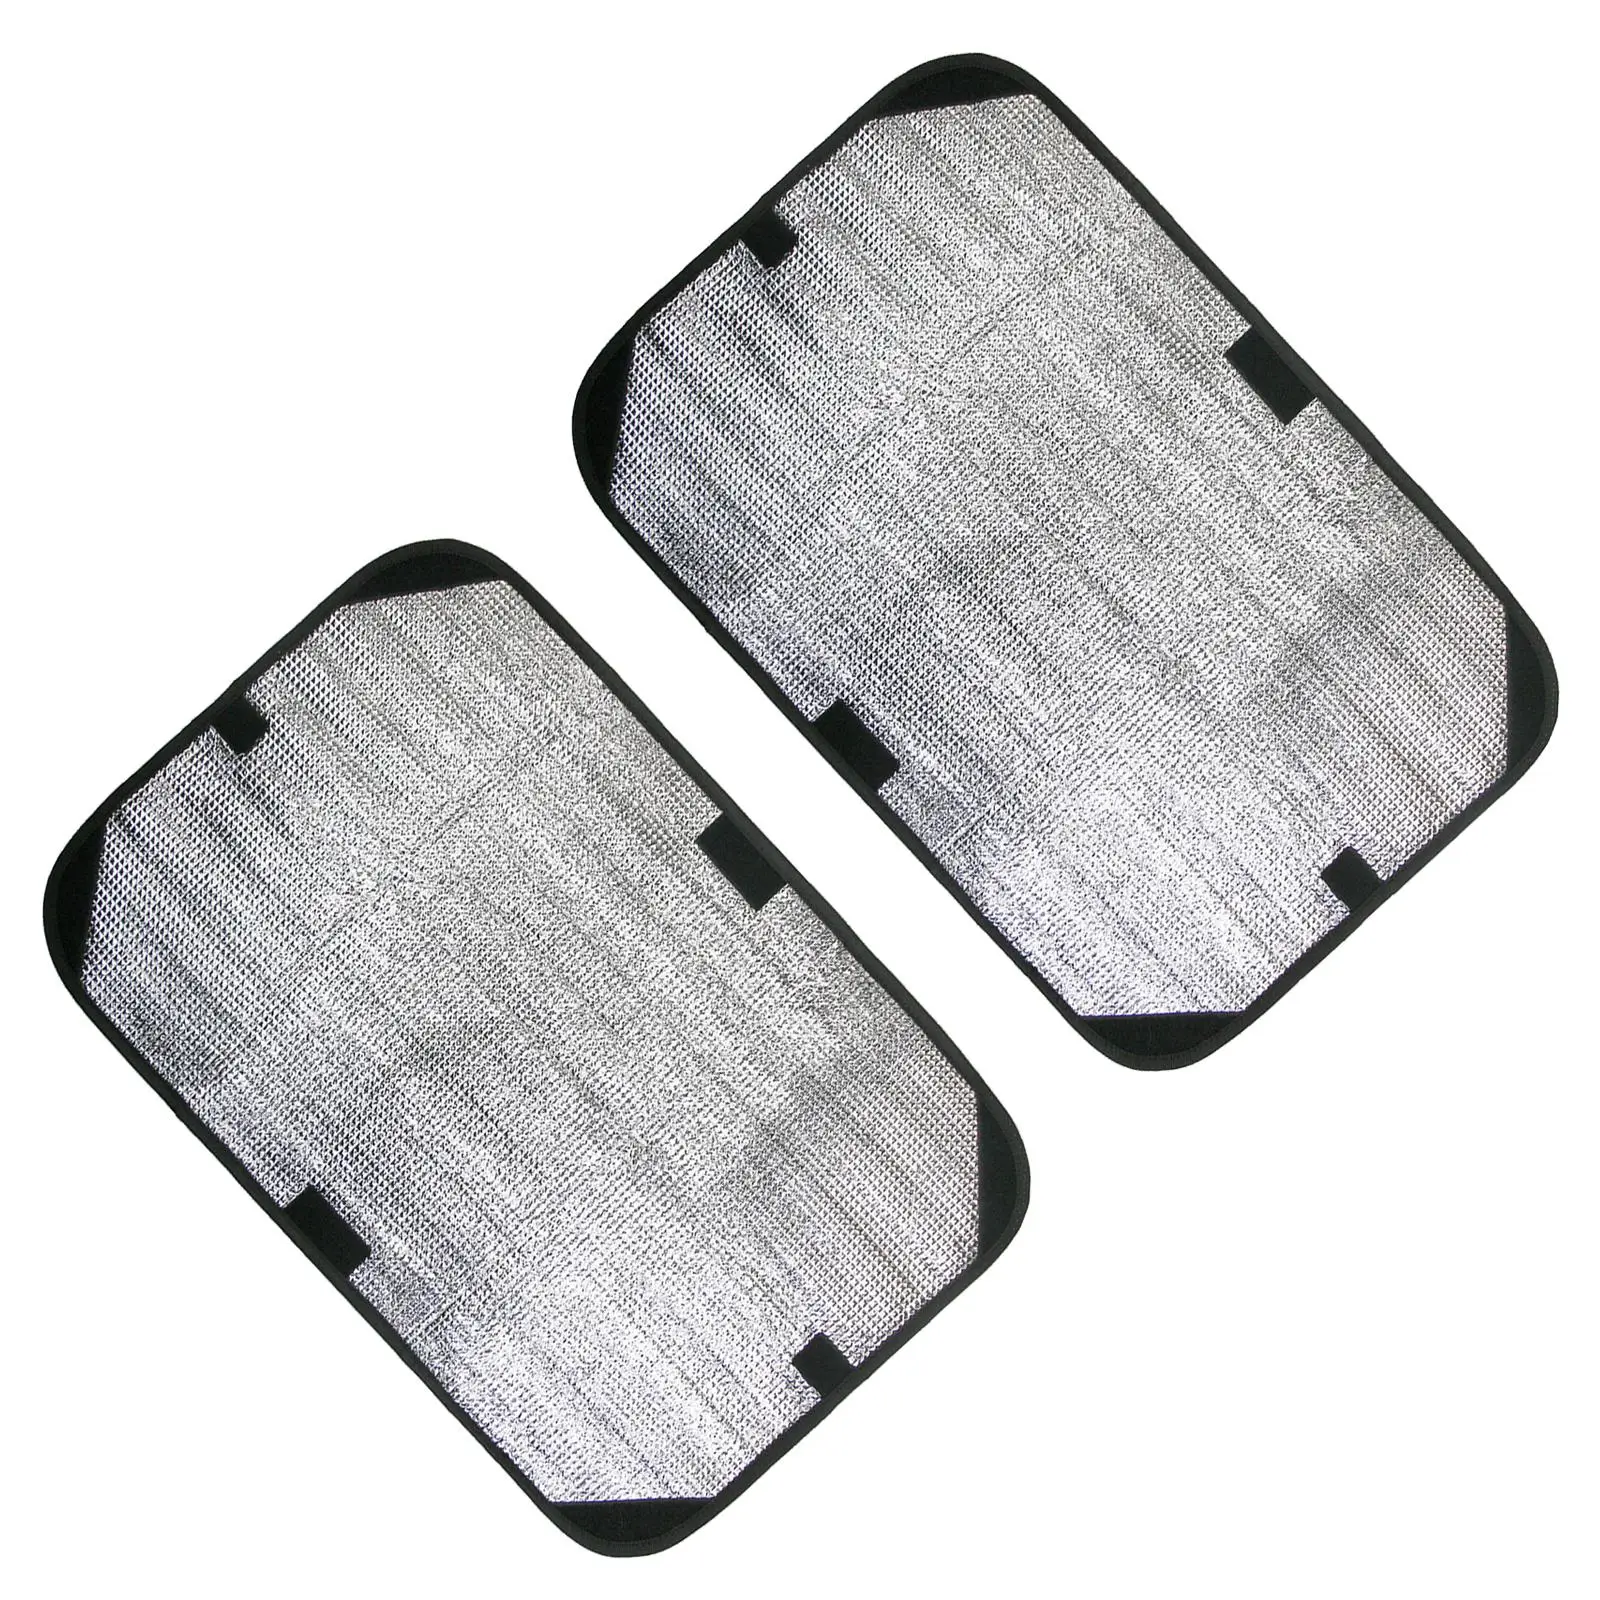 2Pcs RV Door Window Shade Cover 15.94x24.41inch   and  Reflector  for Trailer 